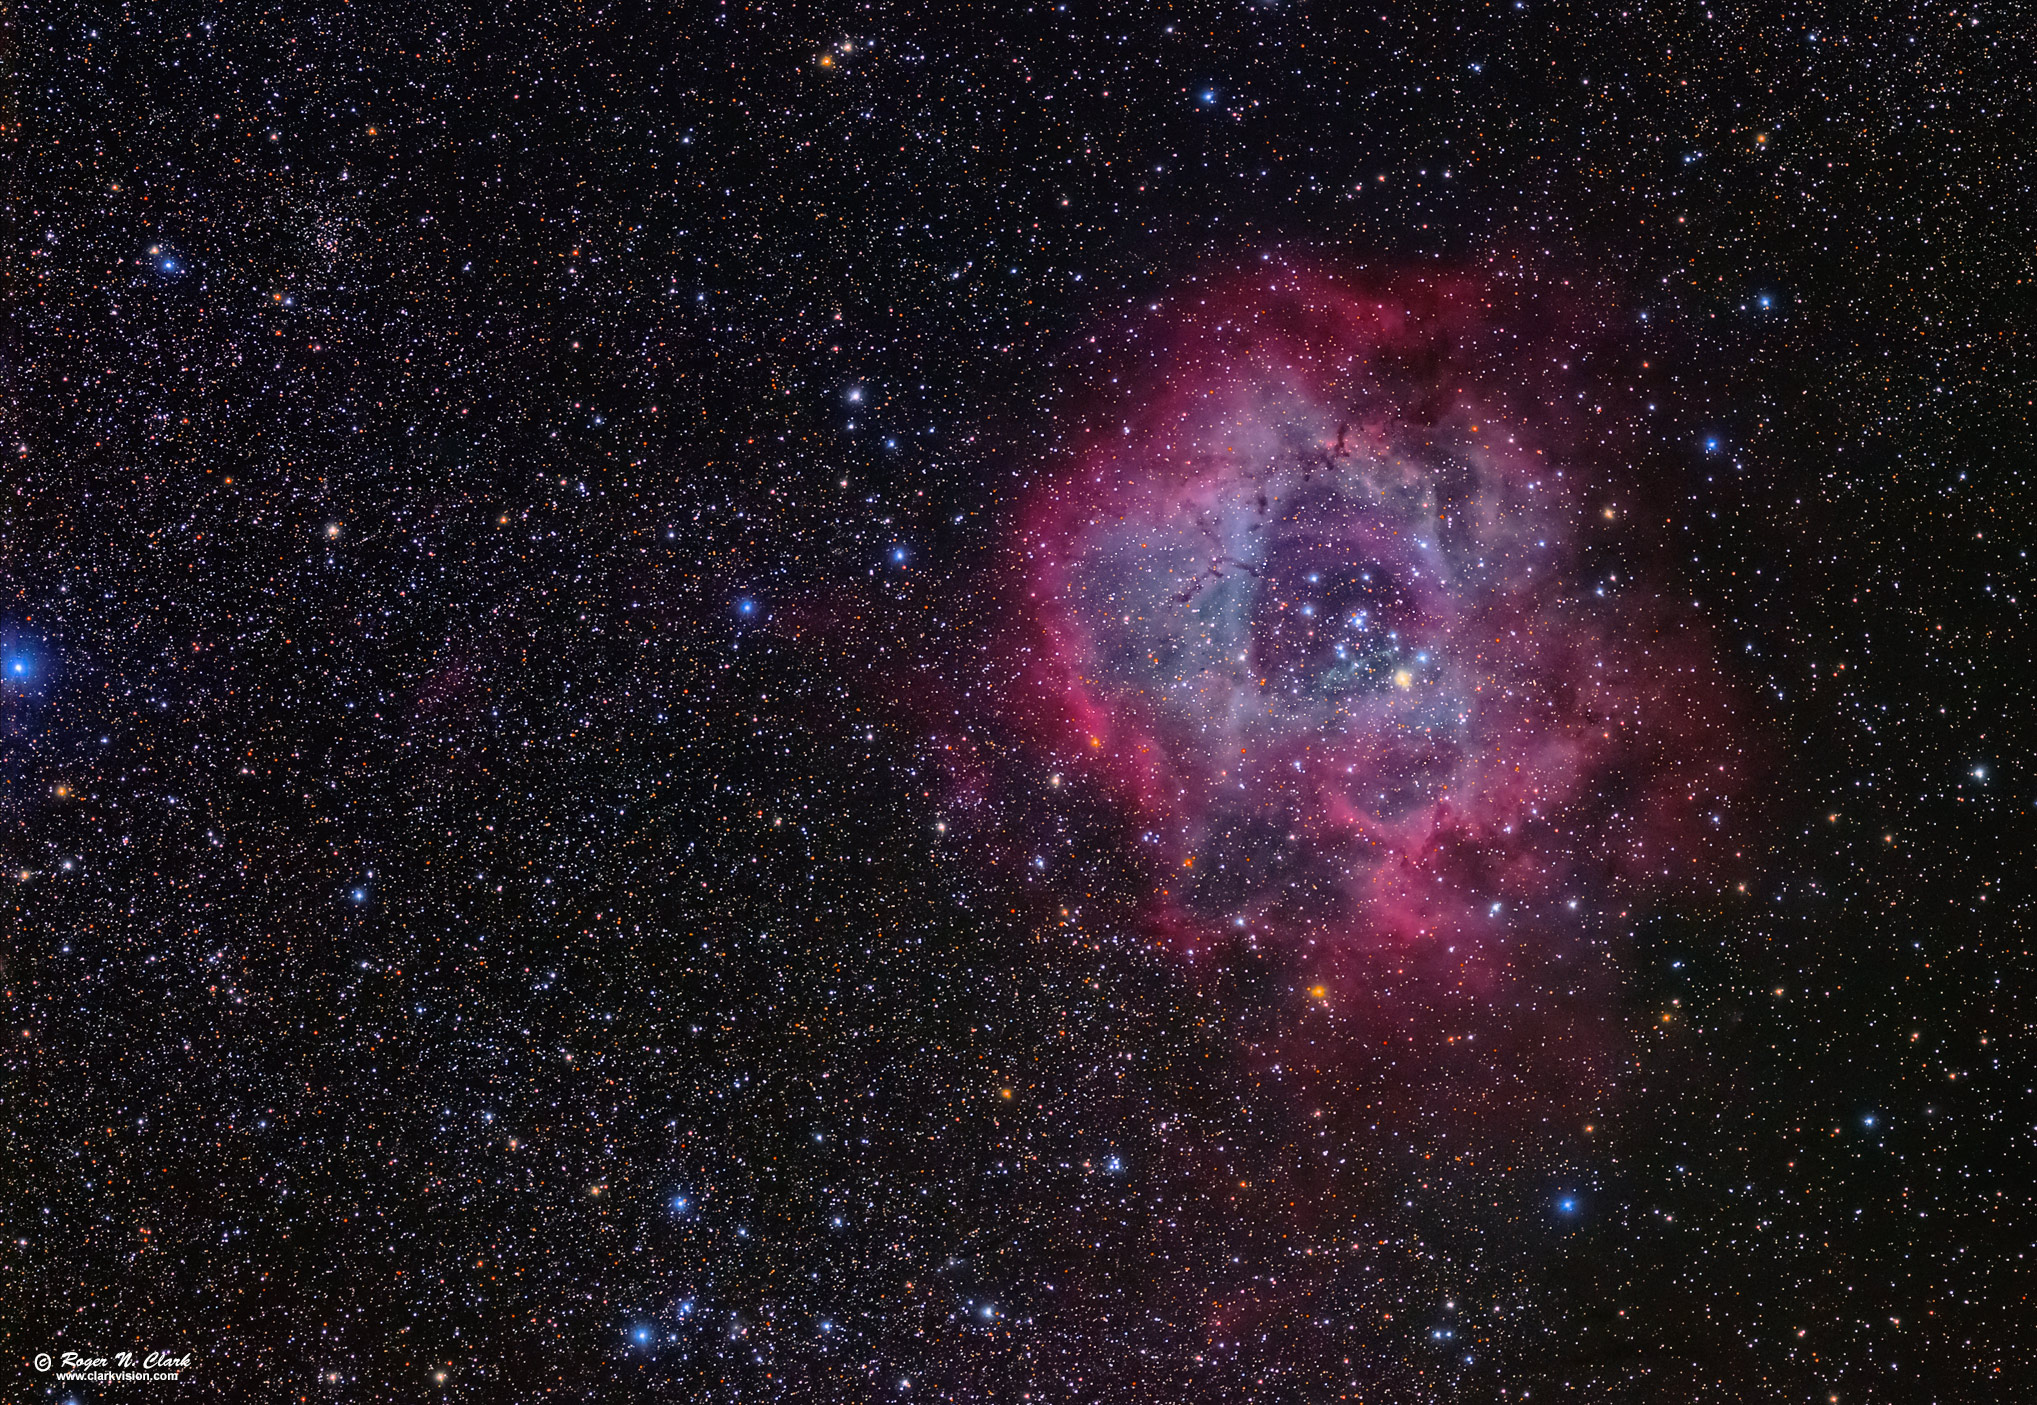 image rosette_nebula_c01.22.2015-t2.0J6A3448-95av29-rs.h-0.45xc1s.jpg is Copyrighted by Roger N. Clark, www.clarkvision.com